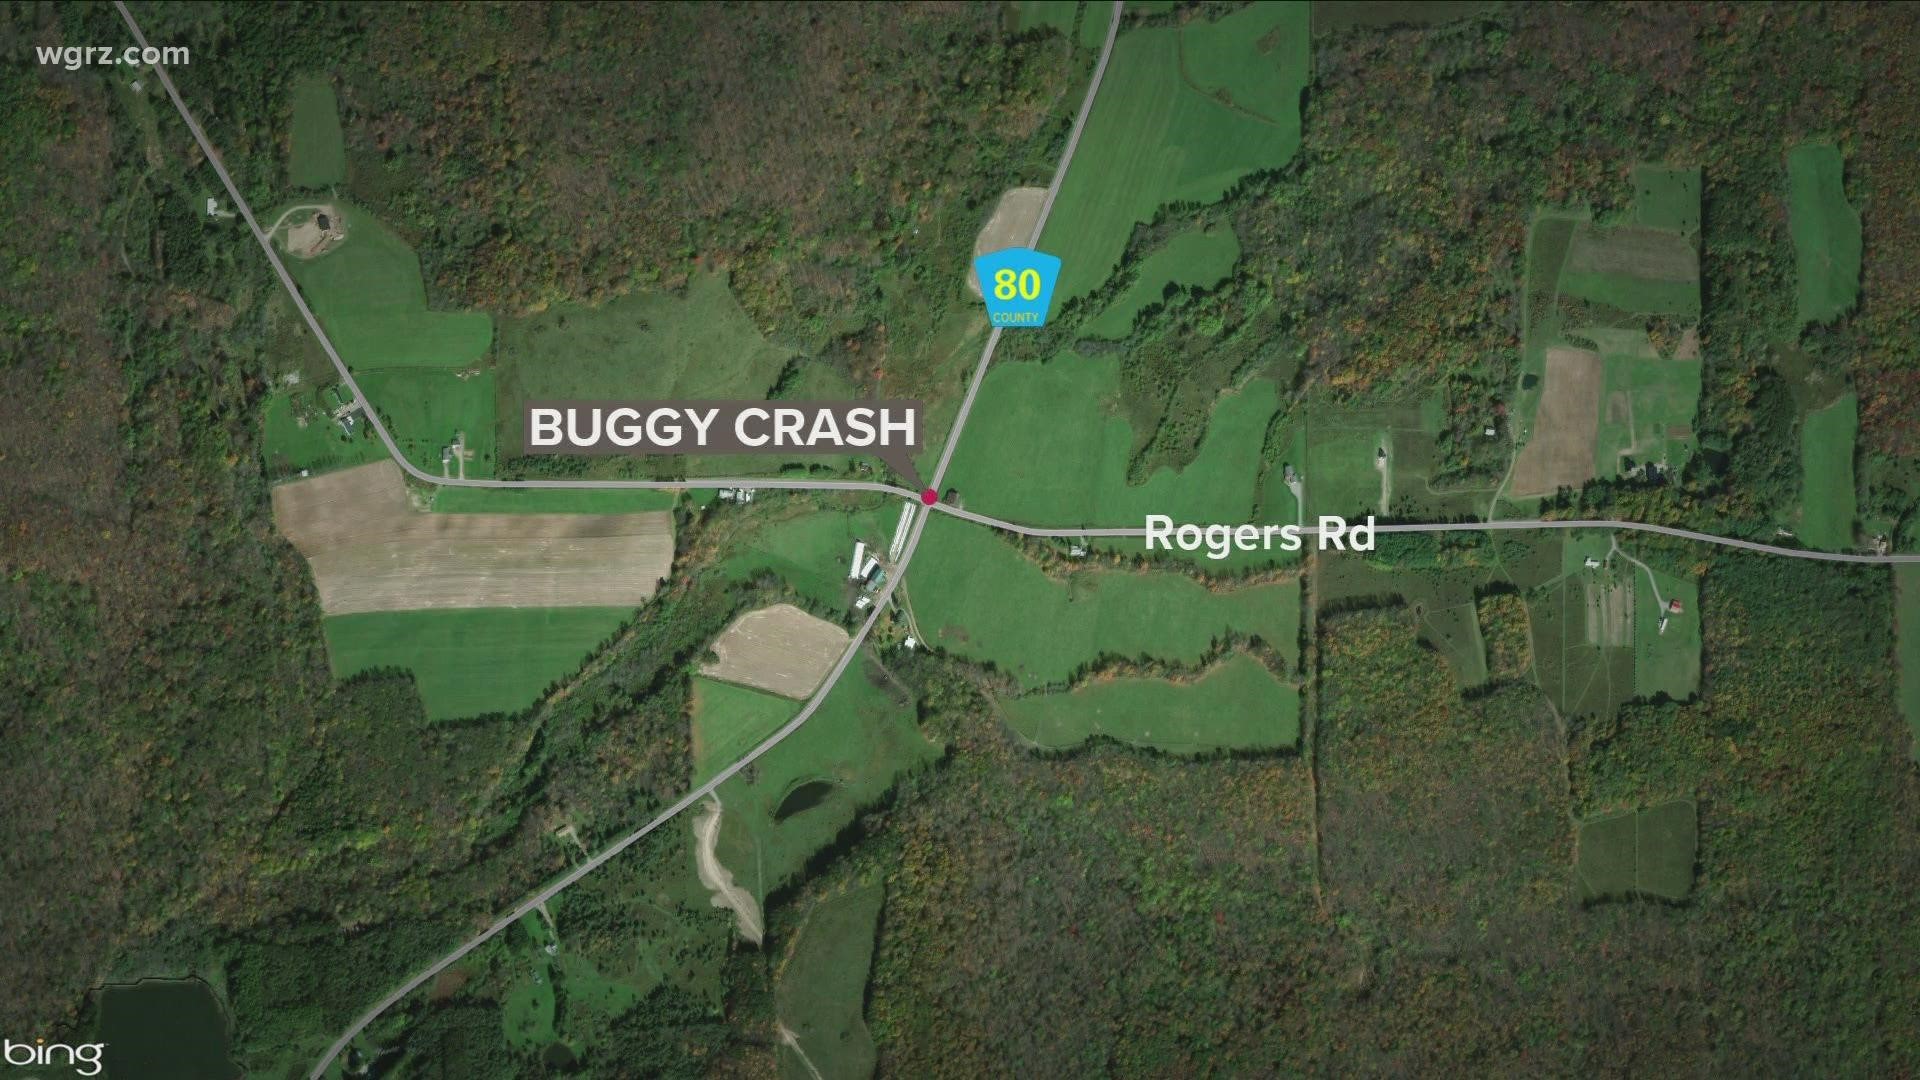 State police say the buggy carrying four children failed to stop at the intersection of Rogers Road and County Route 80 in the town of Farmersville.